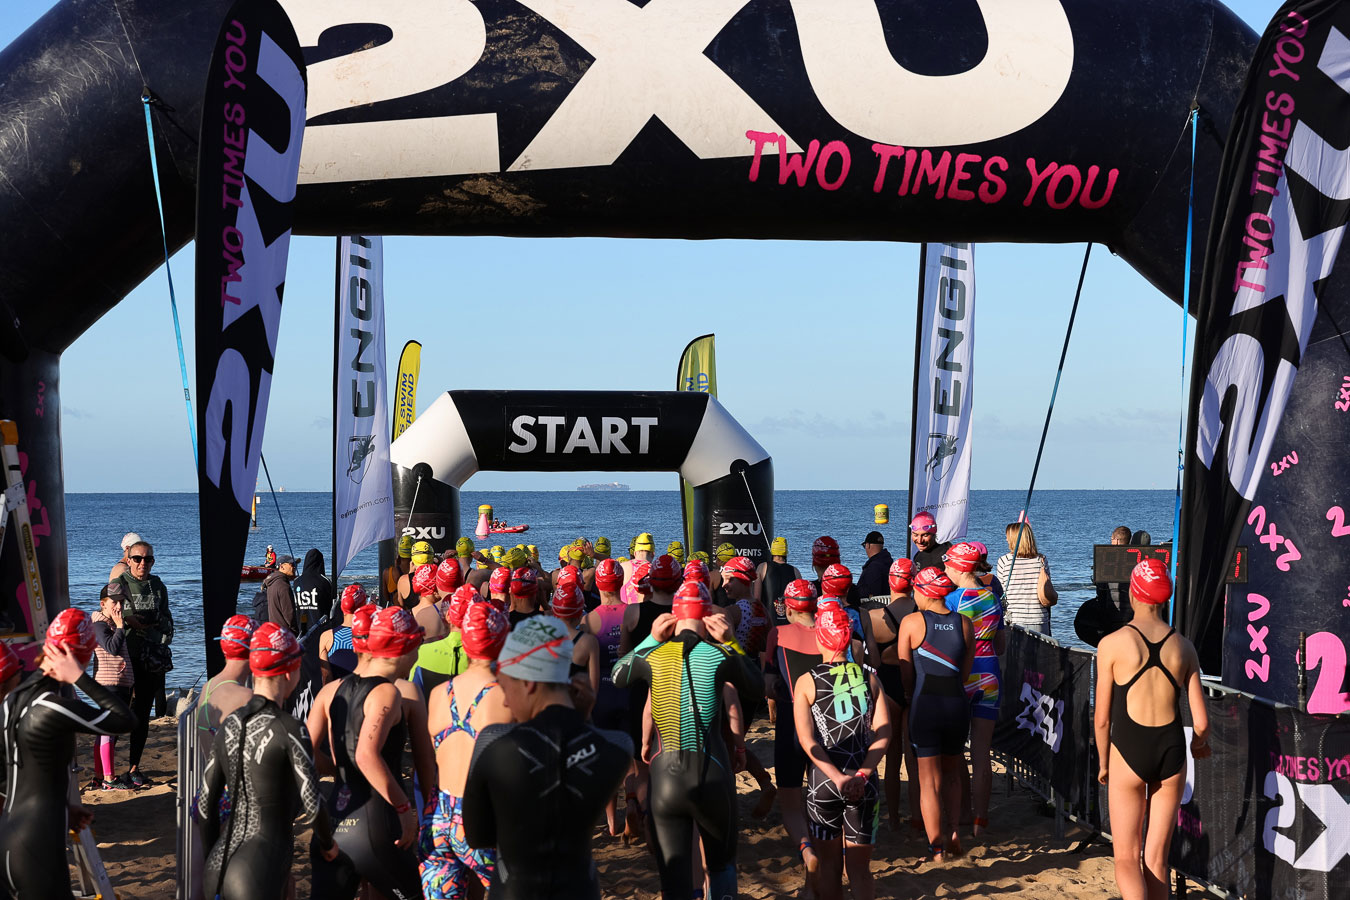 TriShop launches a major partnership with the 2XU Triathlon Series Races